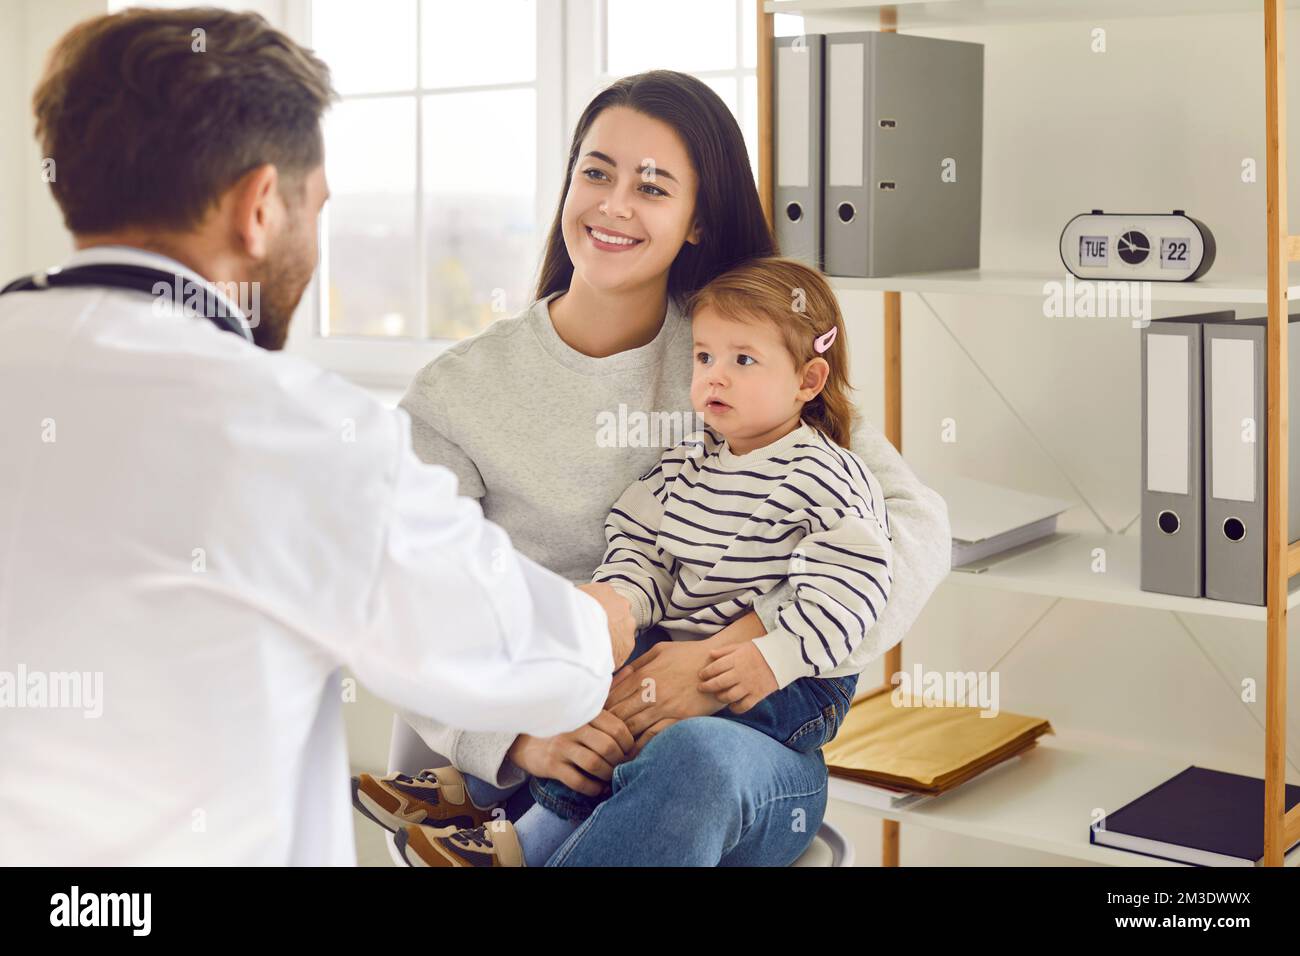 Smiling mother and her two-year-old daughter came for regular checkup at modern hospital. Stock Photo